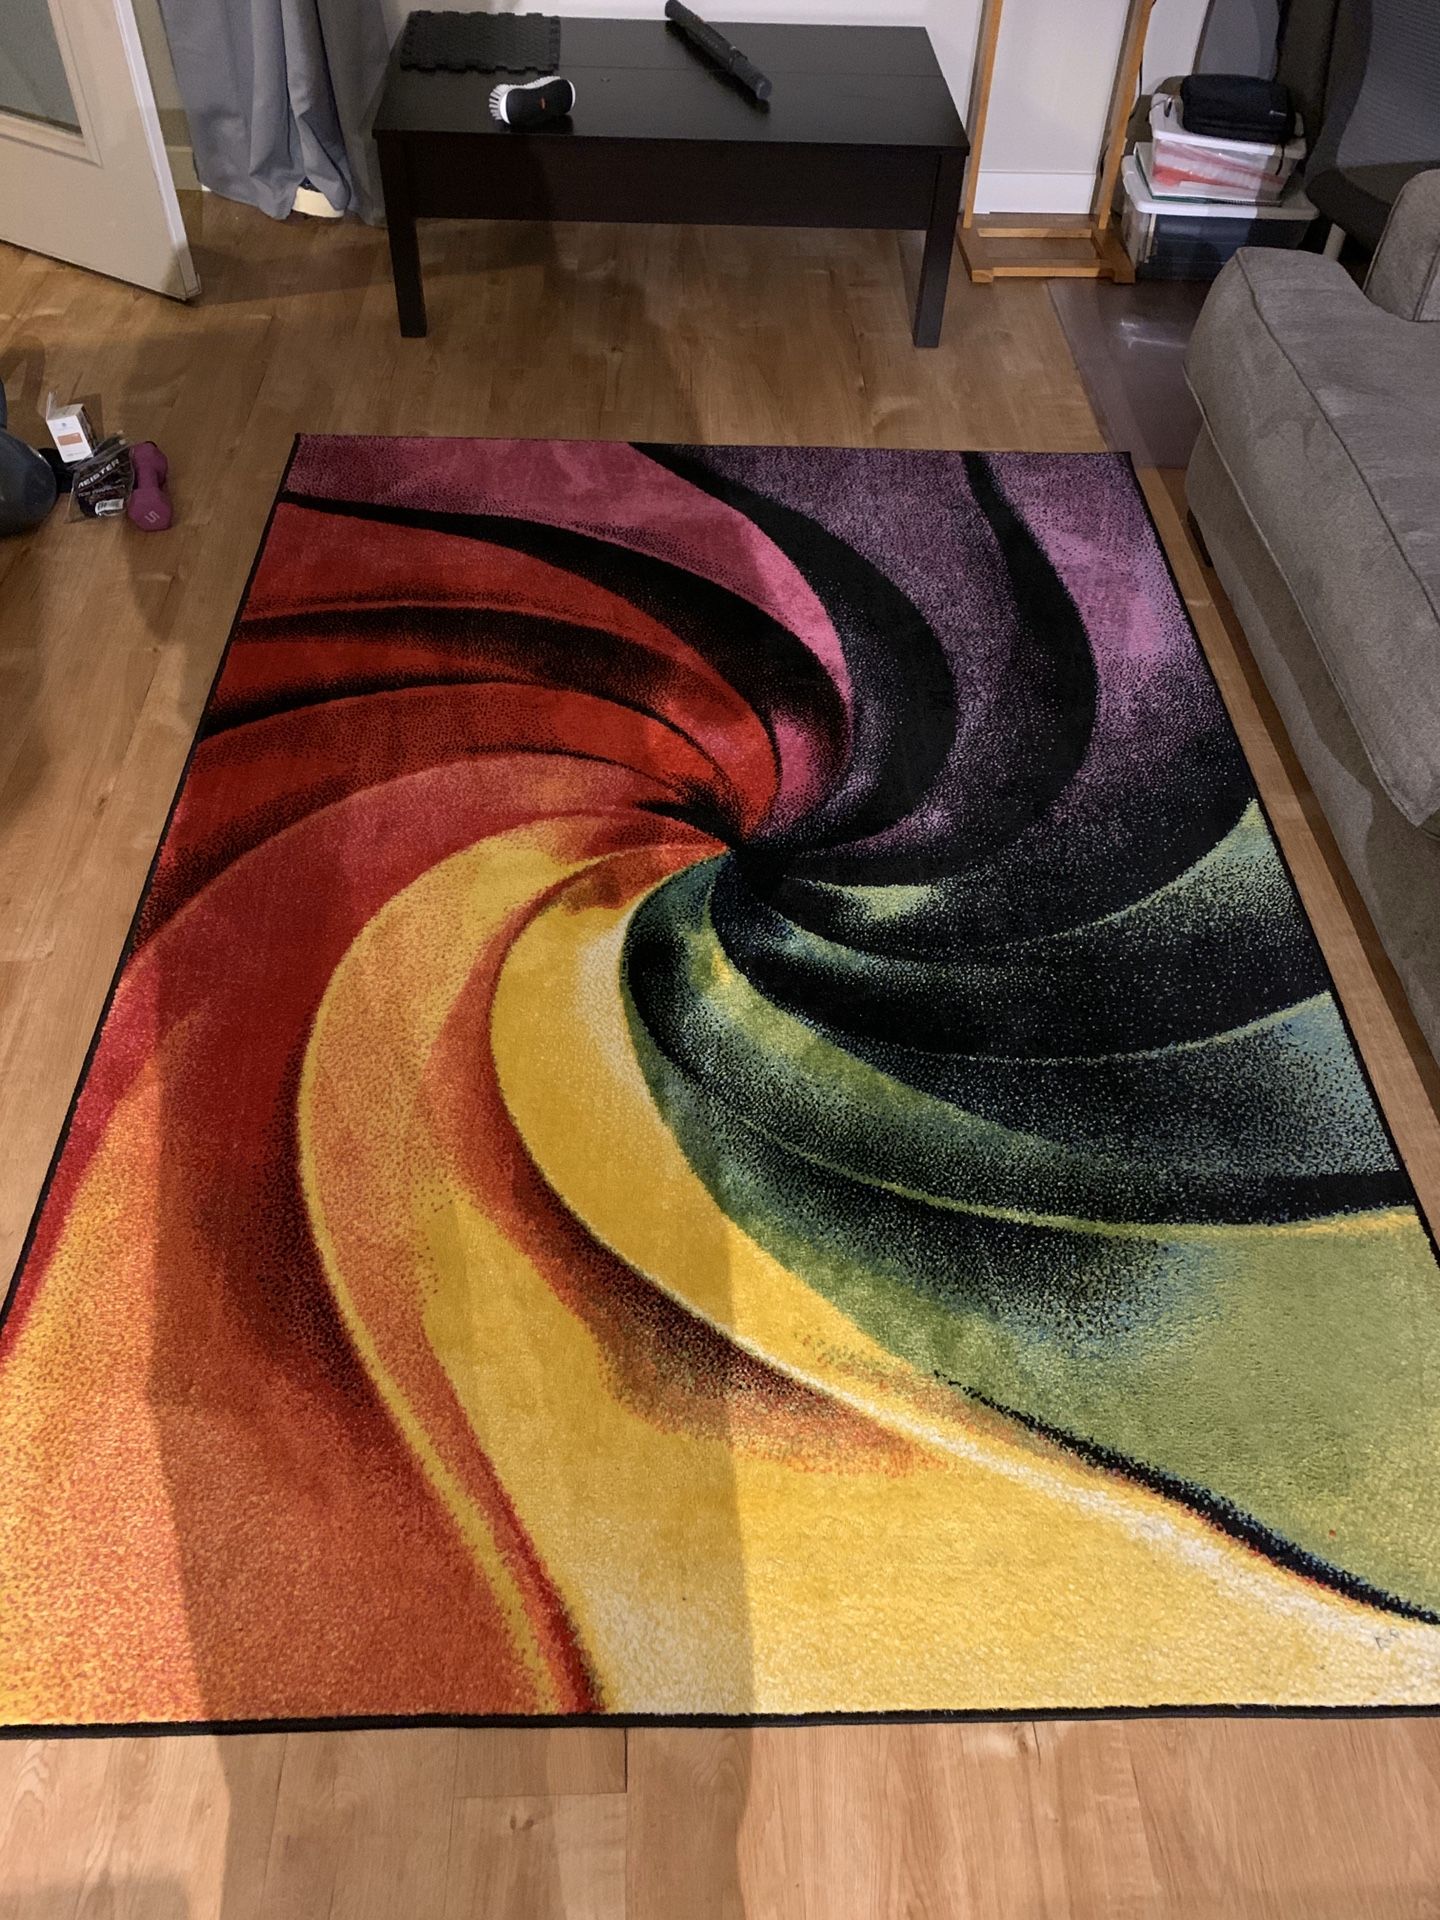 5x8 area Rug. 4 months old with a runner